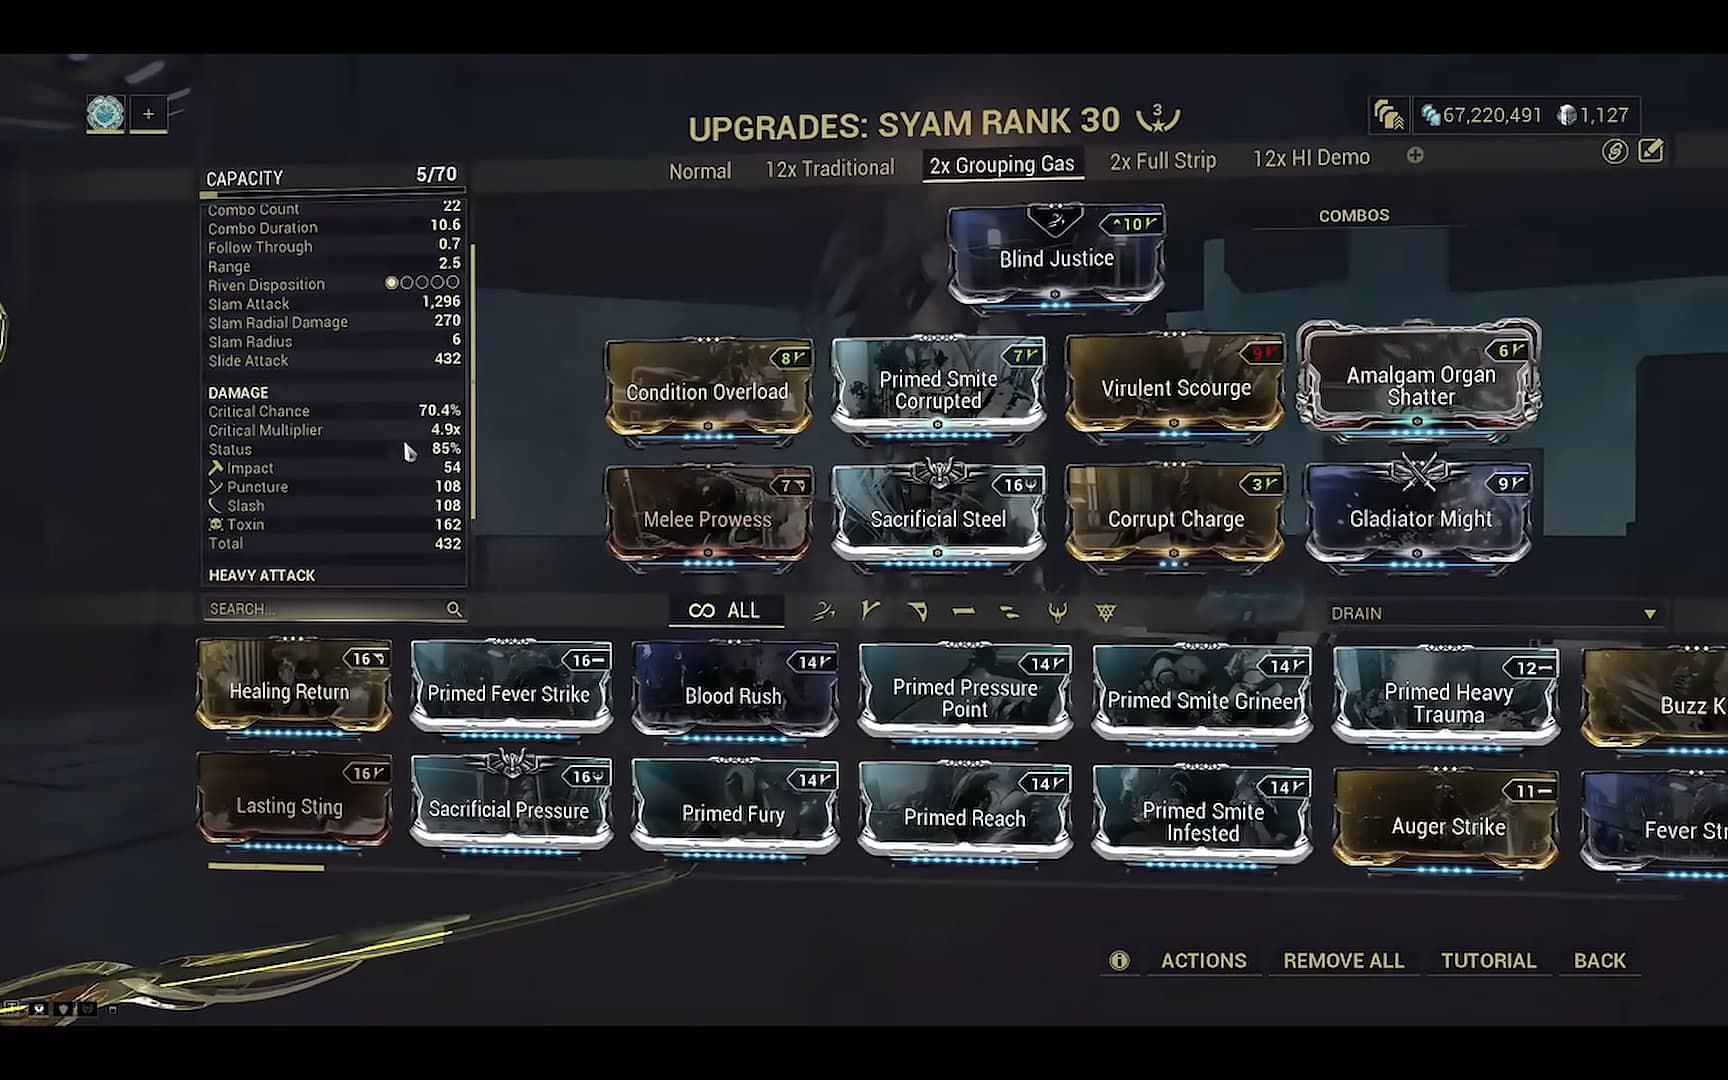 Where To Farm Condition Overload And Other Strong Melee Mods In Warframe 